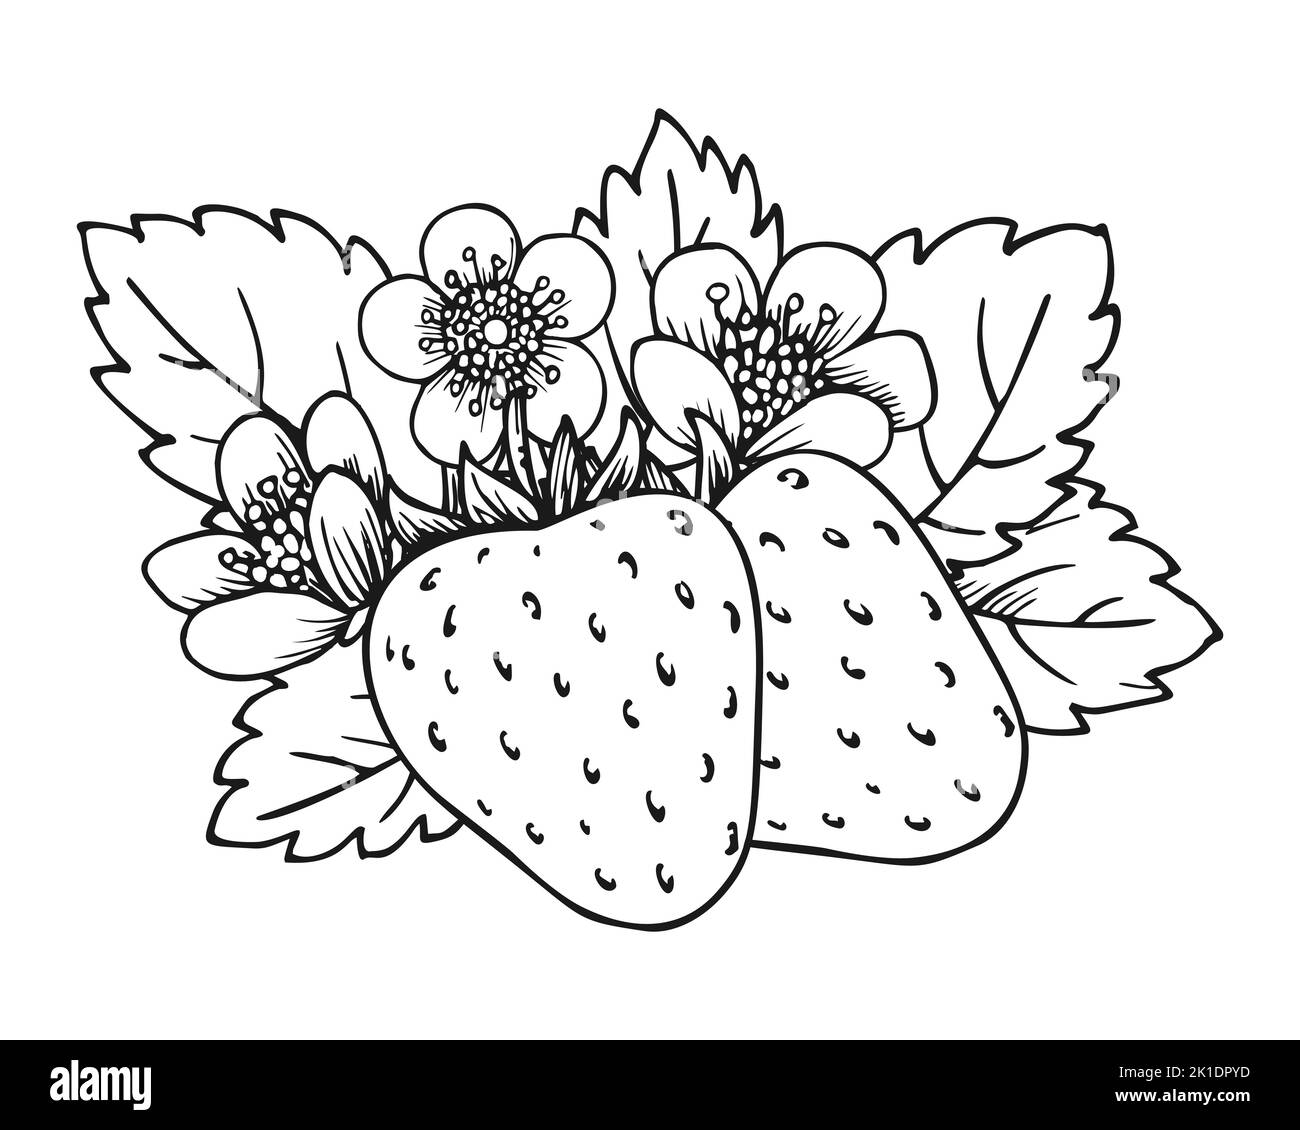 Strawberry bunch of two berries. Coloring book page. Whole ripe wild forest berry with leaves and blossom flowers. Tasty sweet fresh fruit. Juicy strawberries handdrawn clip art black white sketch Stock Vector